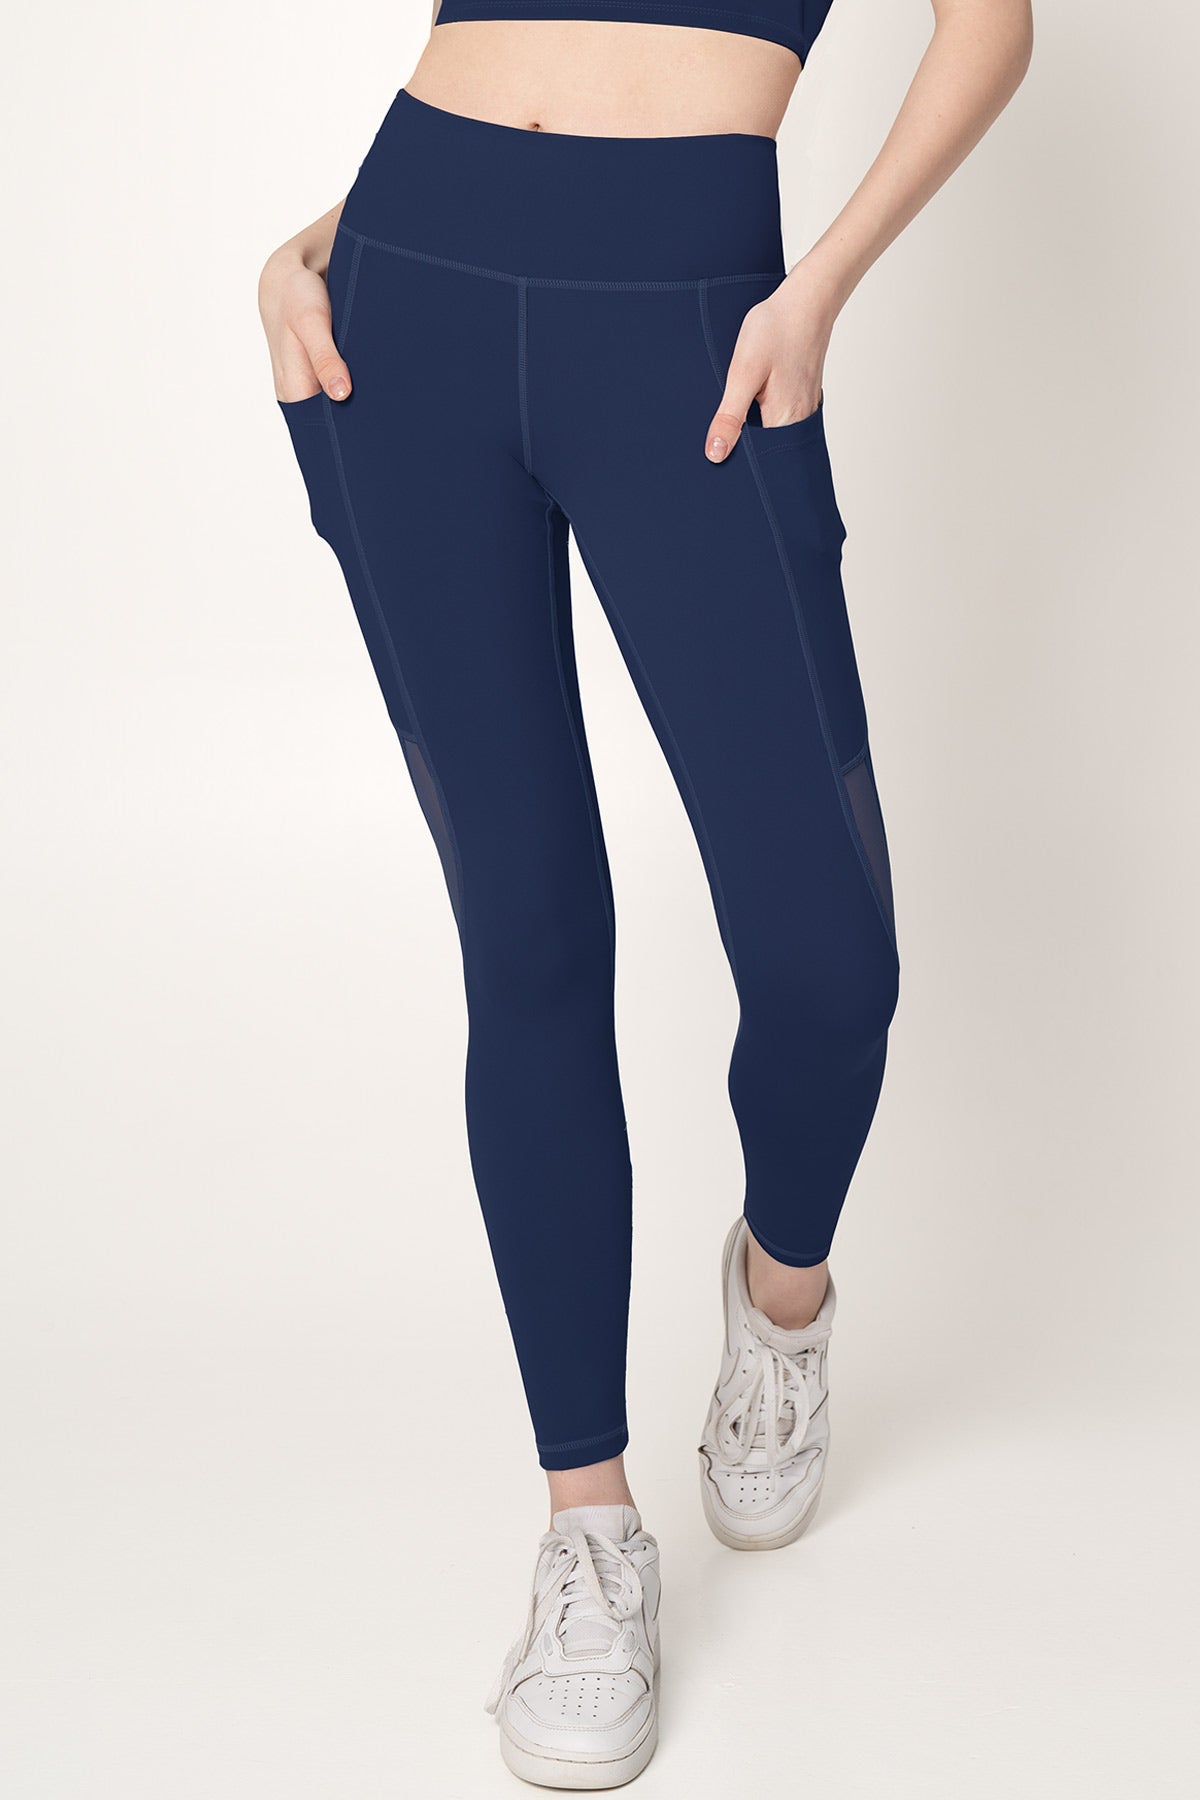 Navy Blue Cassi Workout Legging Yoga Pants with Mesh & Pockets - Women - Pineapple Clothing